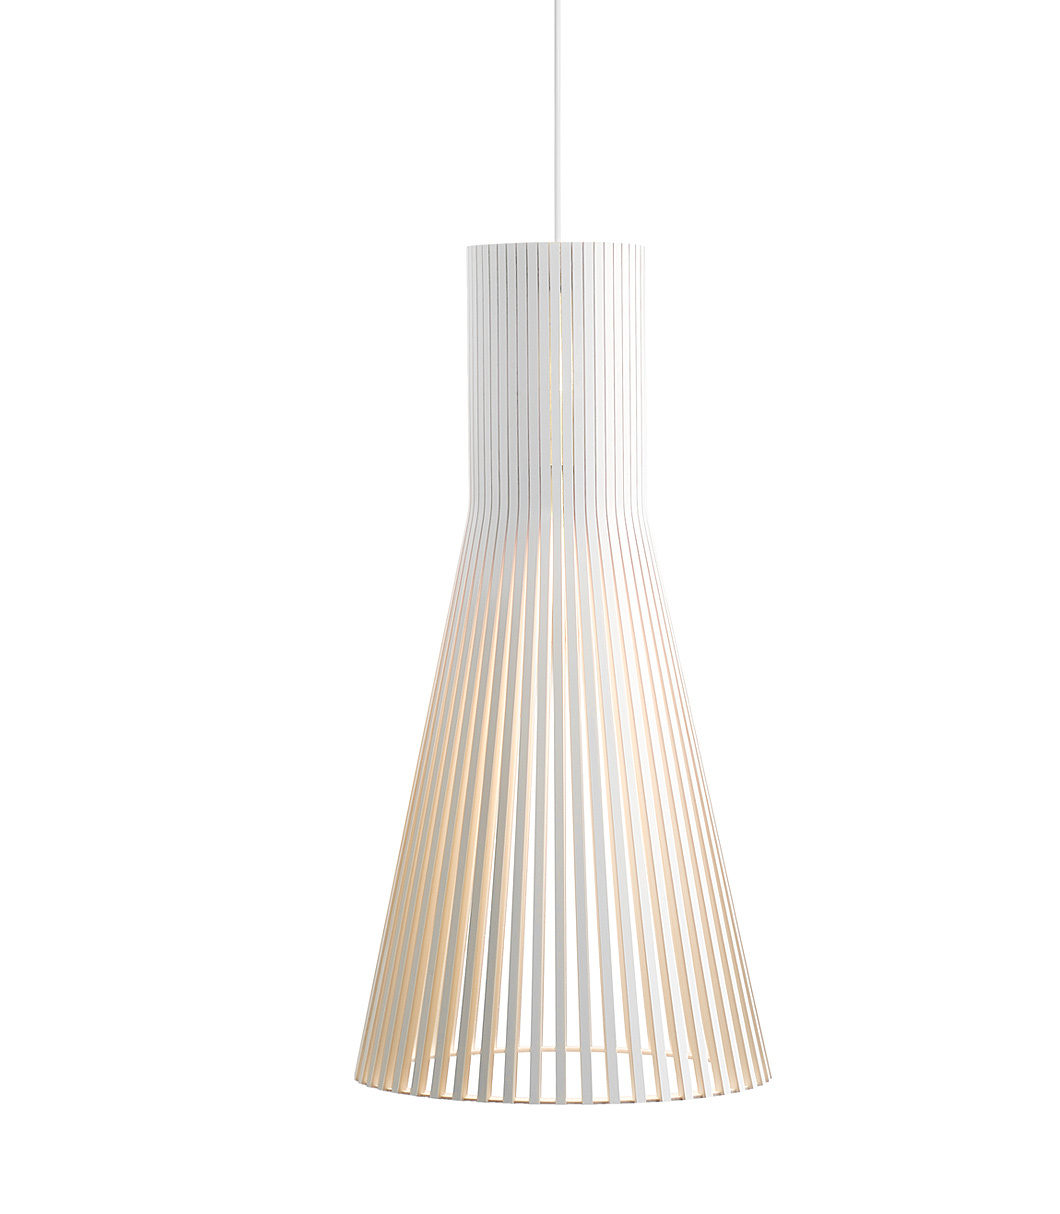 Secto 4200 pendant lamp is available in white laminated